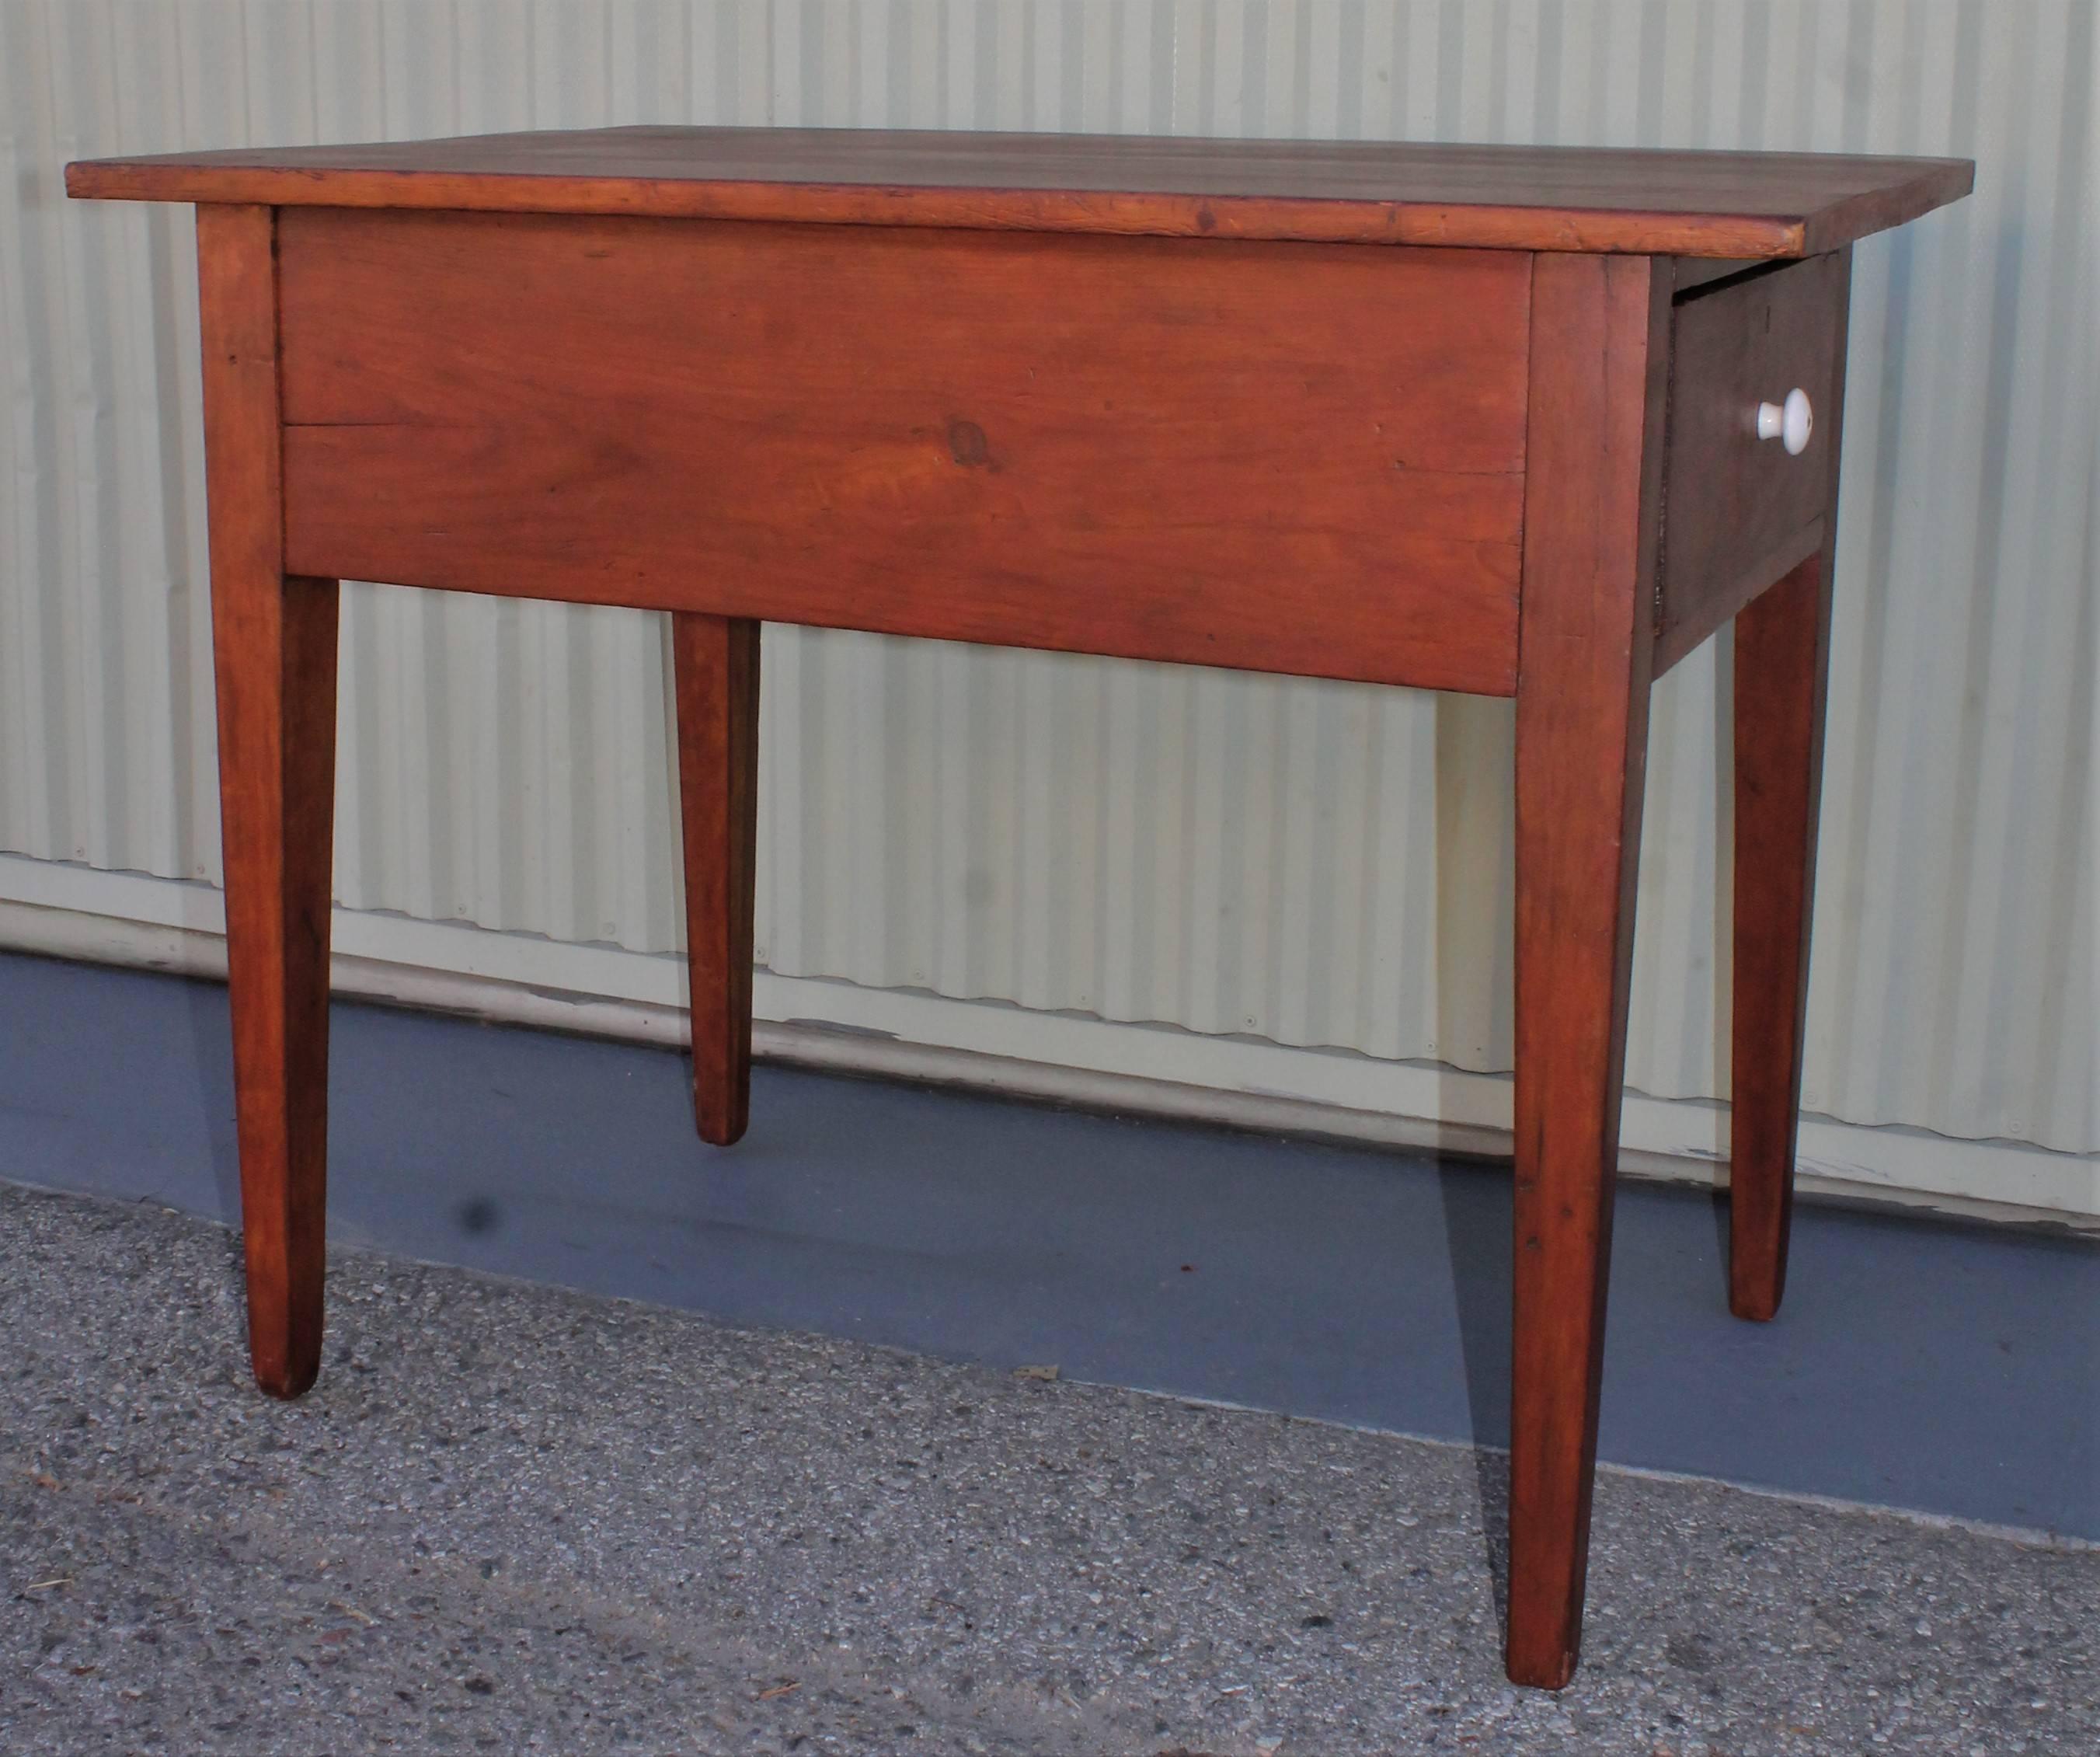 Other 19th Century Work Table with Original Red Painted Wash